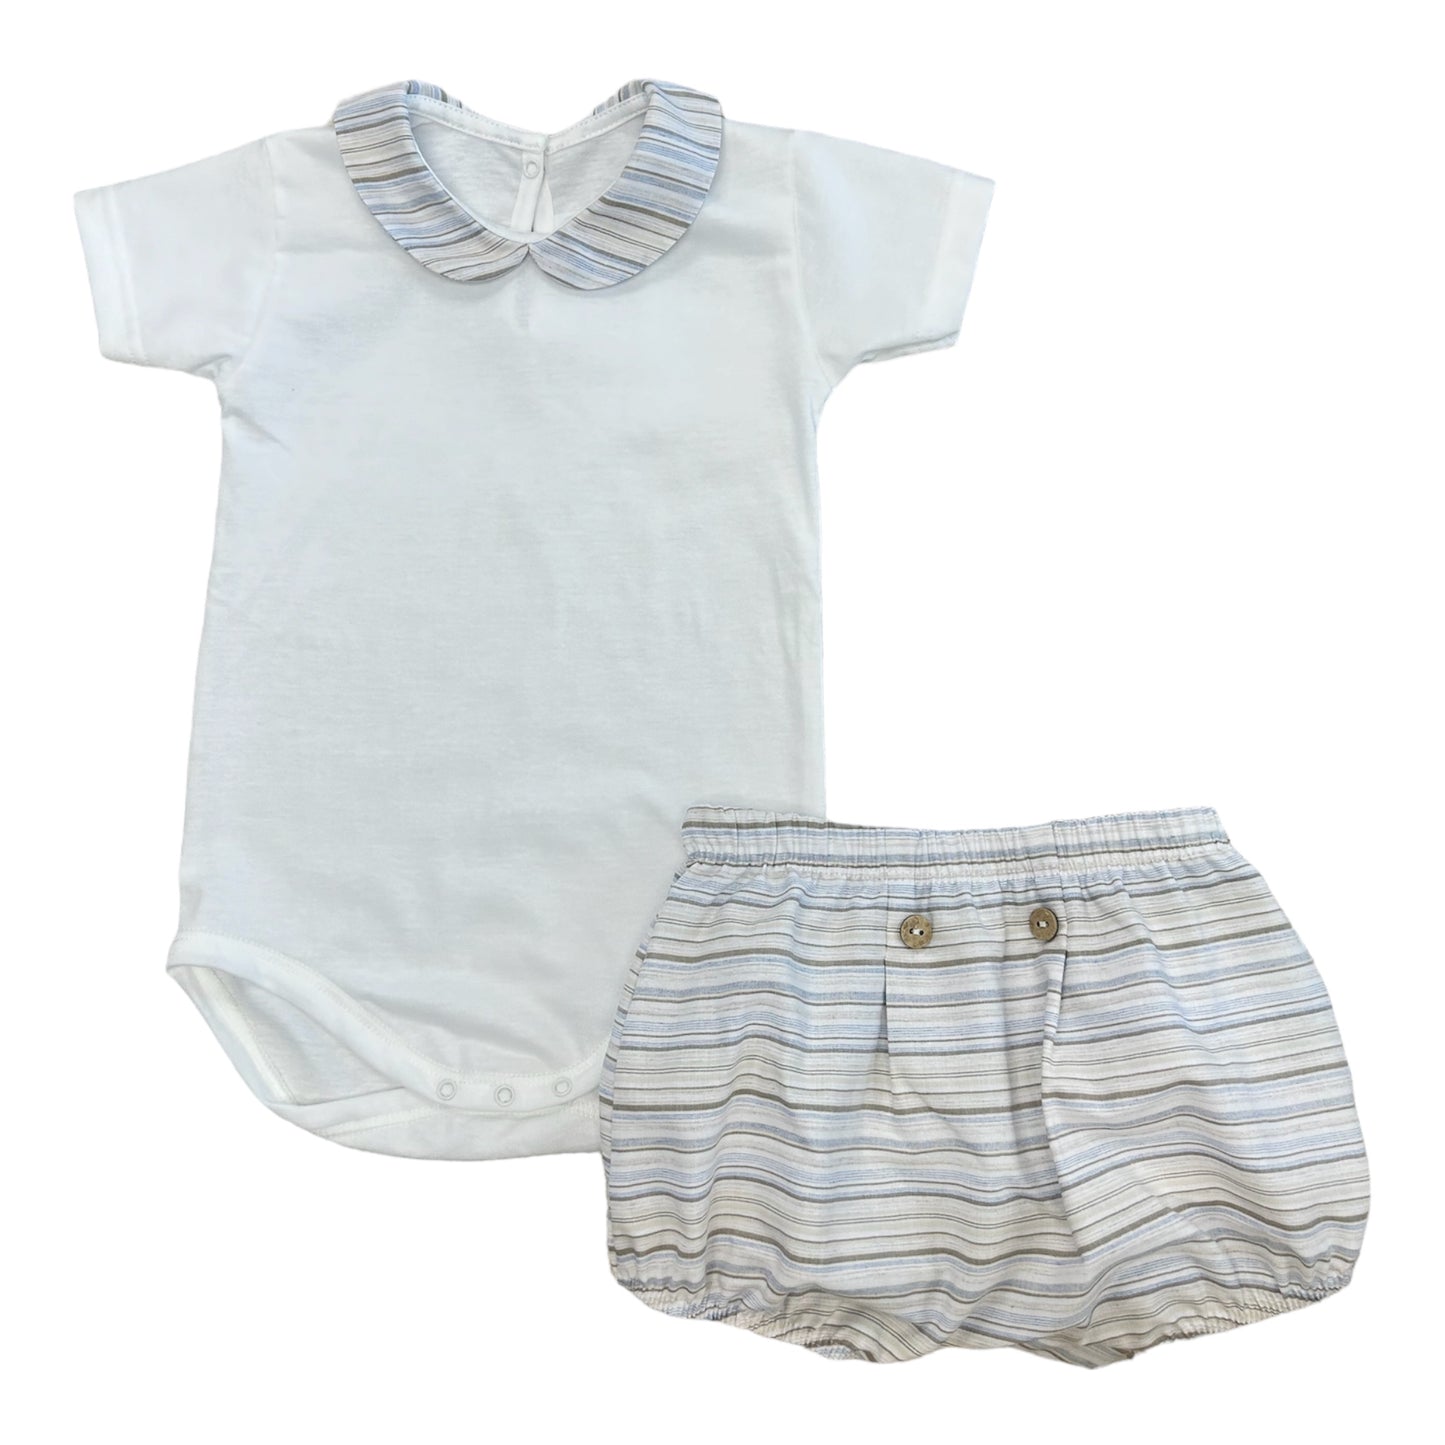 Rapife, 2 piece outfits, Rapife - 2 piece outfit, top and stripe short pants